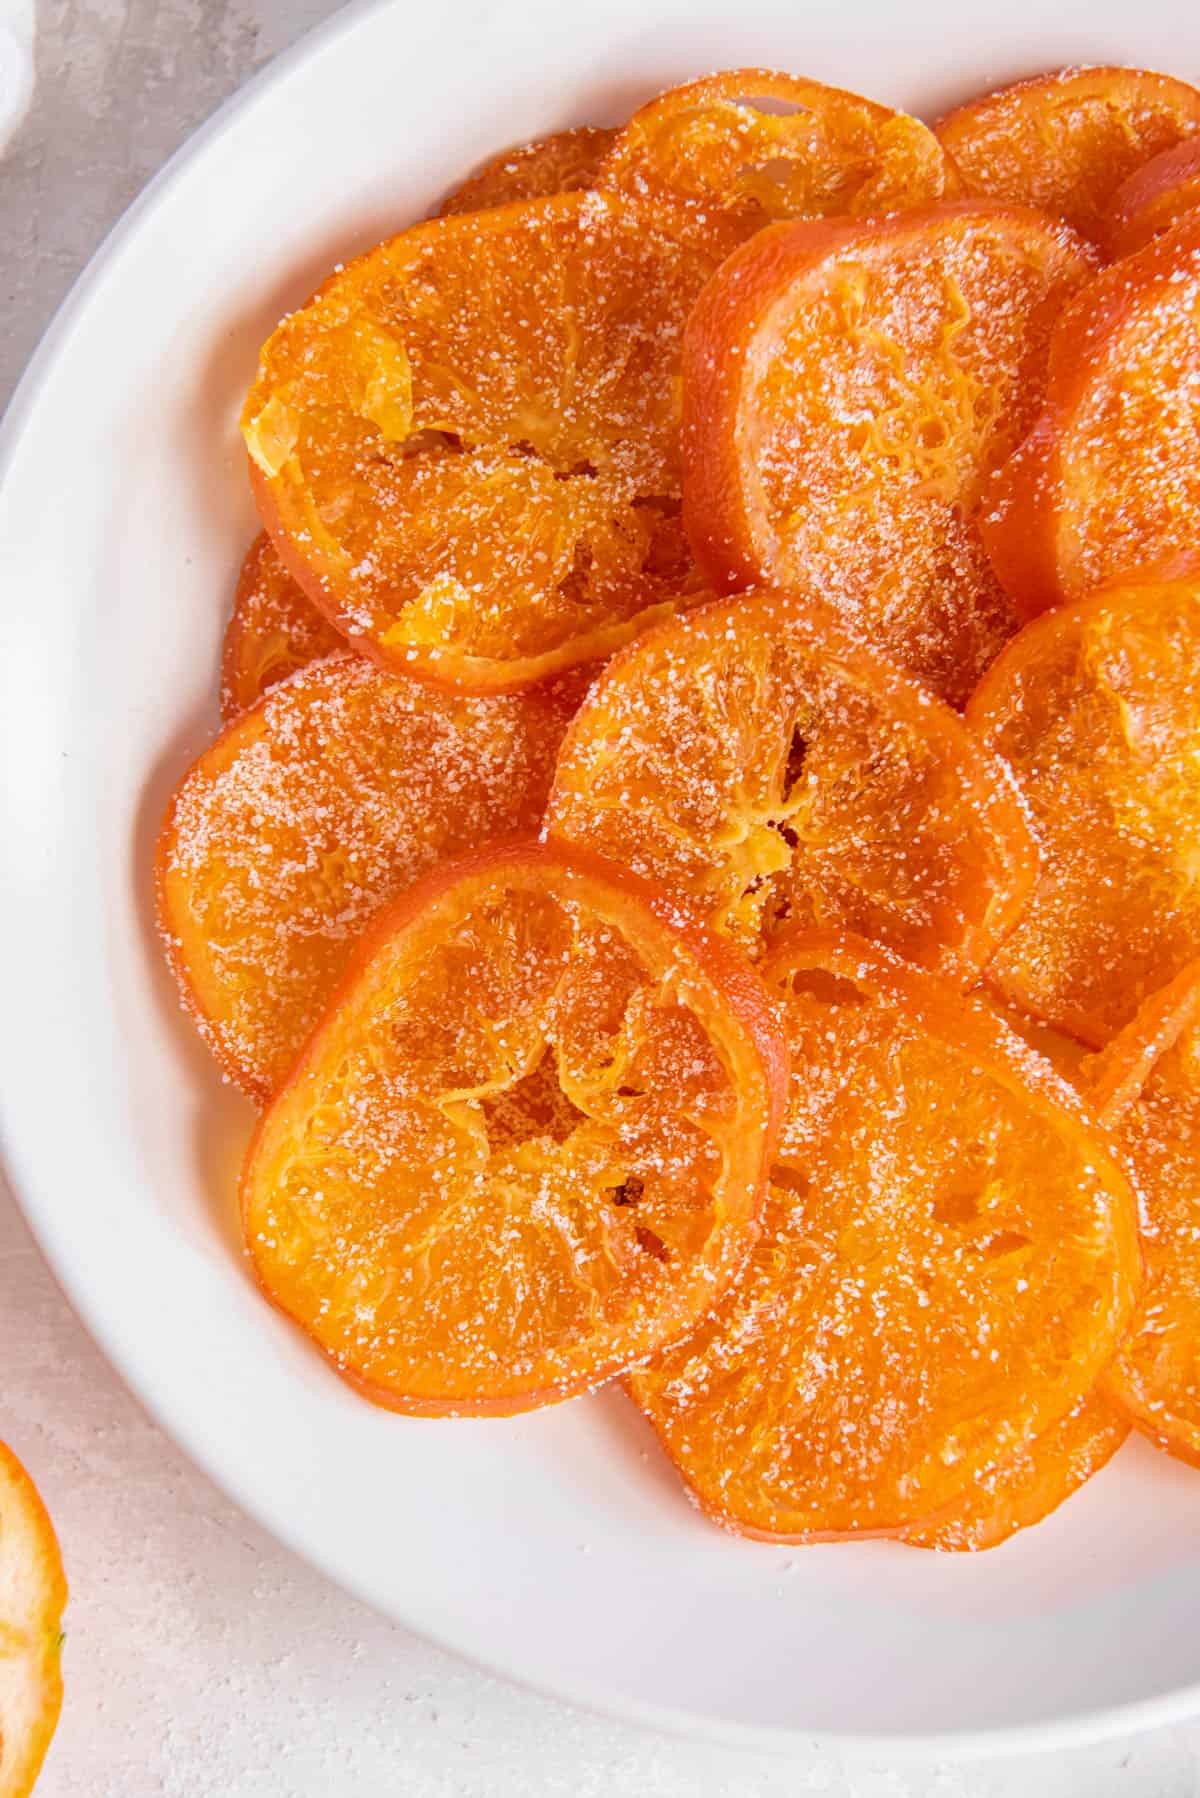 Candied orange slices piled on top of a white plate in a circle pattern.